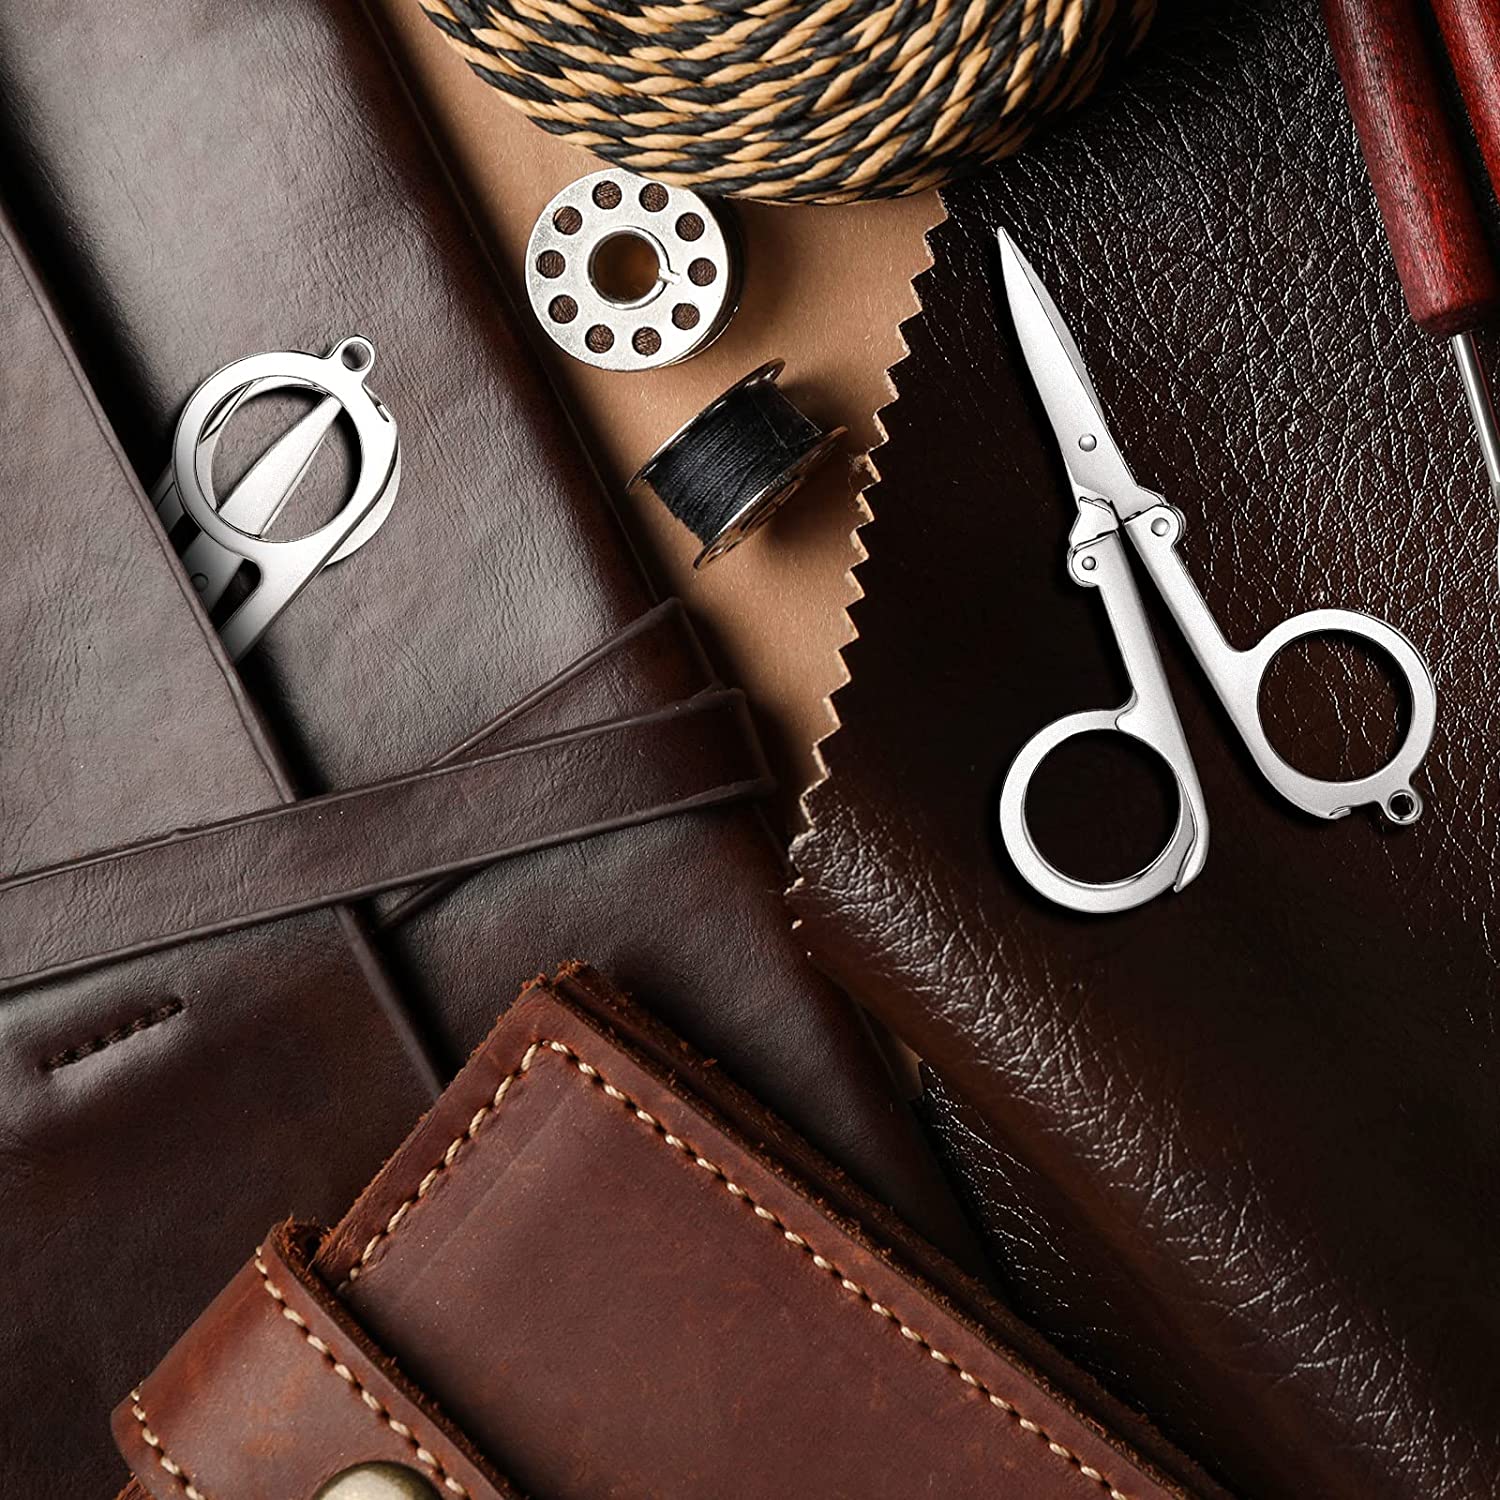 Portable Mini Folding Scissors Can Be Used As A Key Chain Decoration  Fashion Gadget